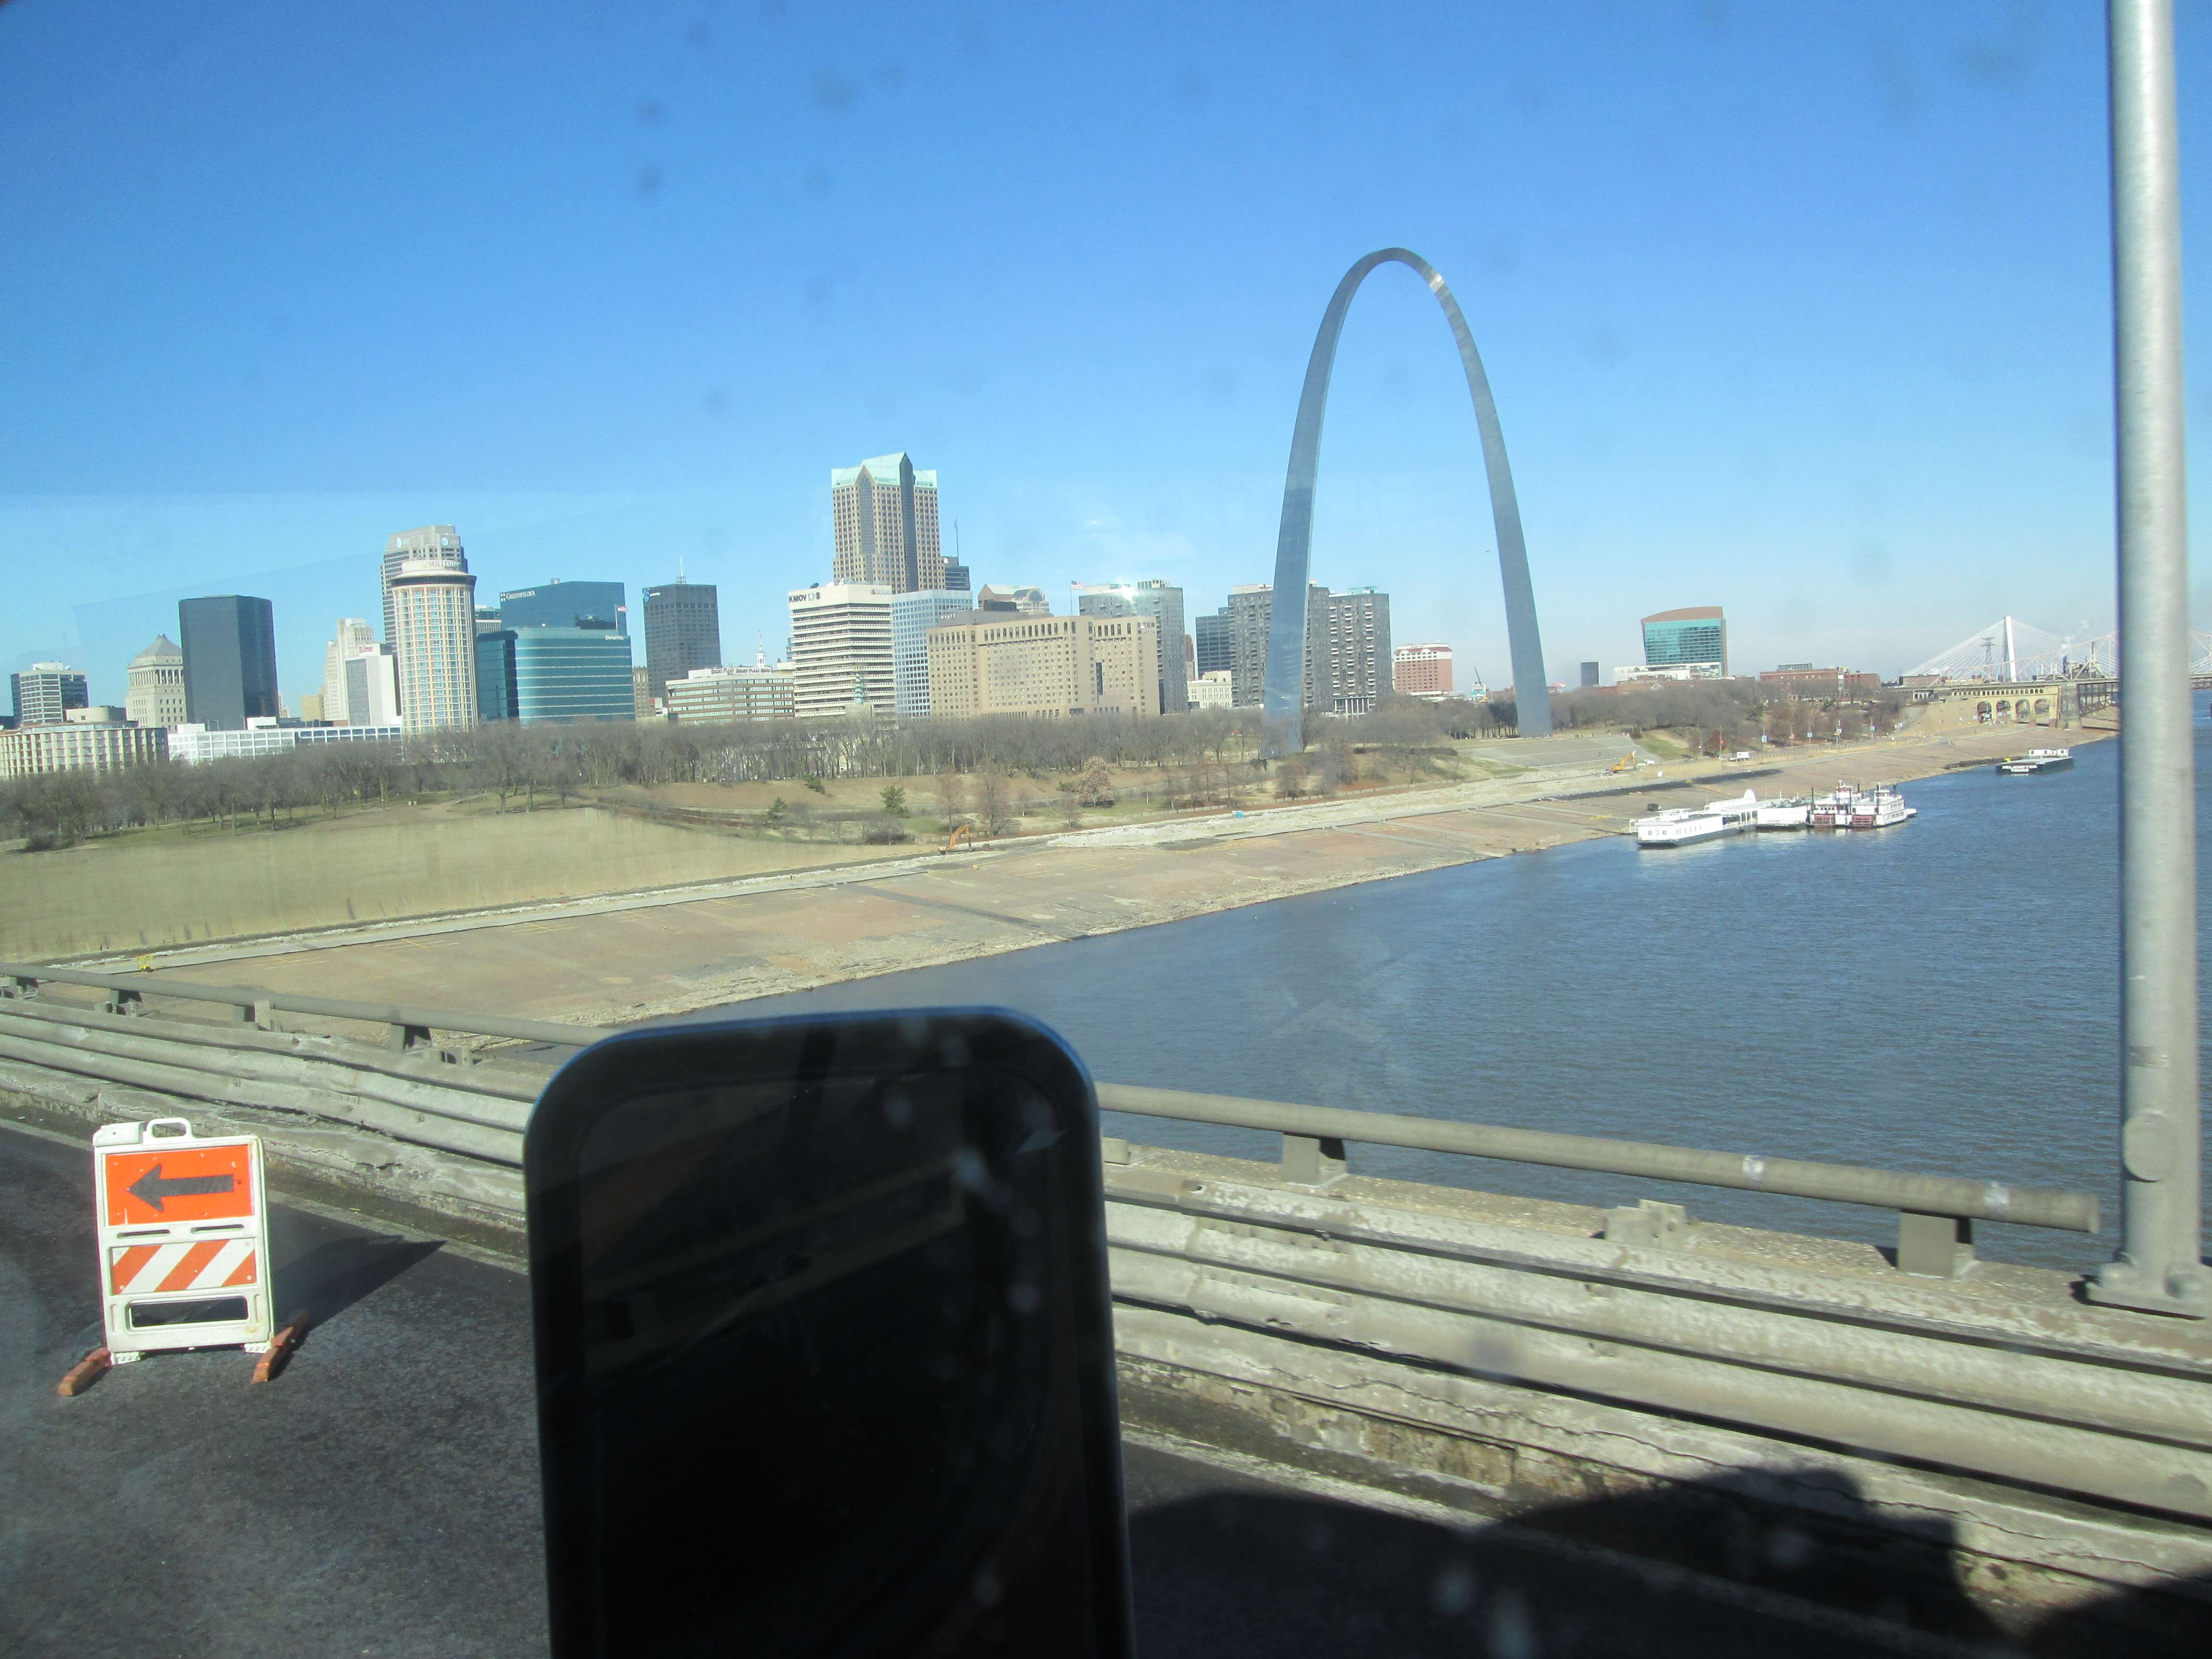 A picture of the St. Louis arch from a truck window